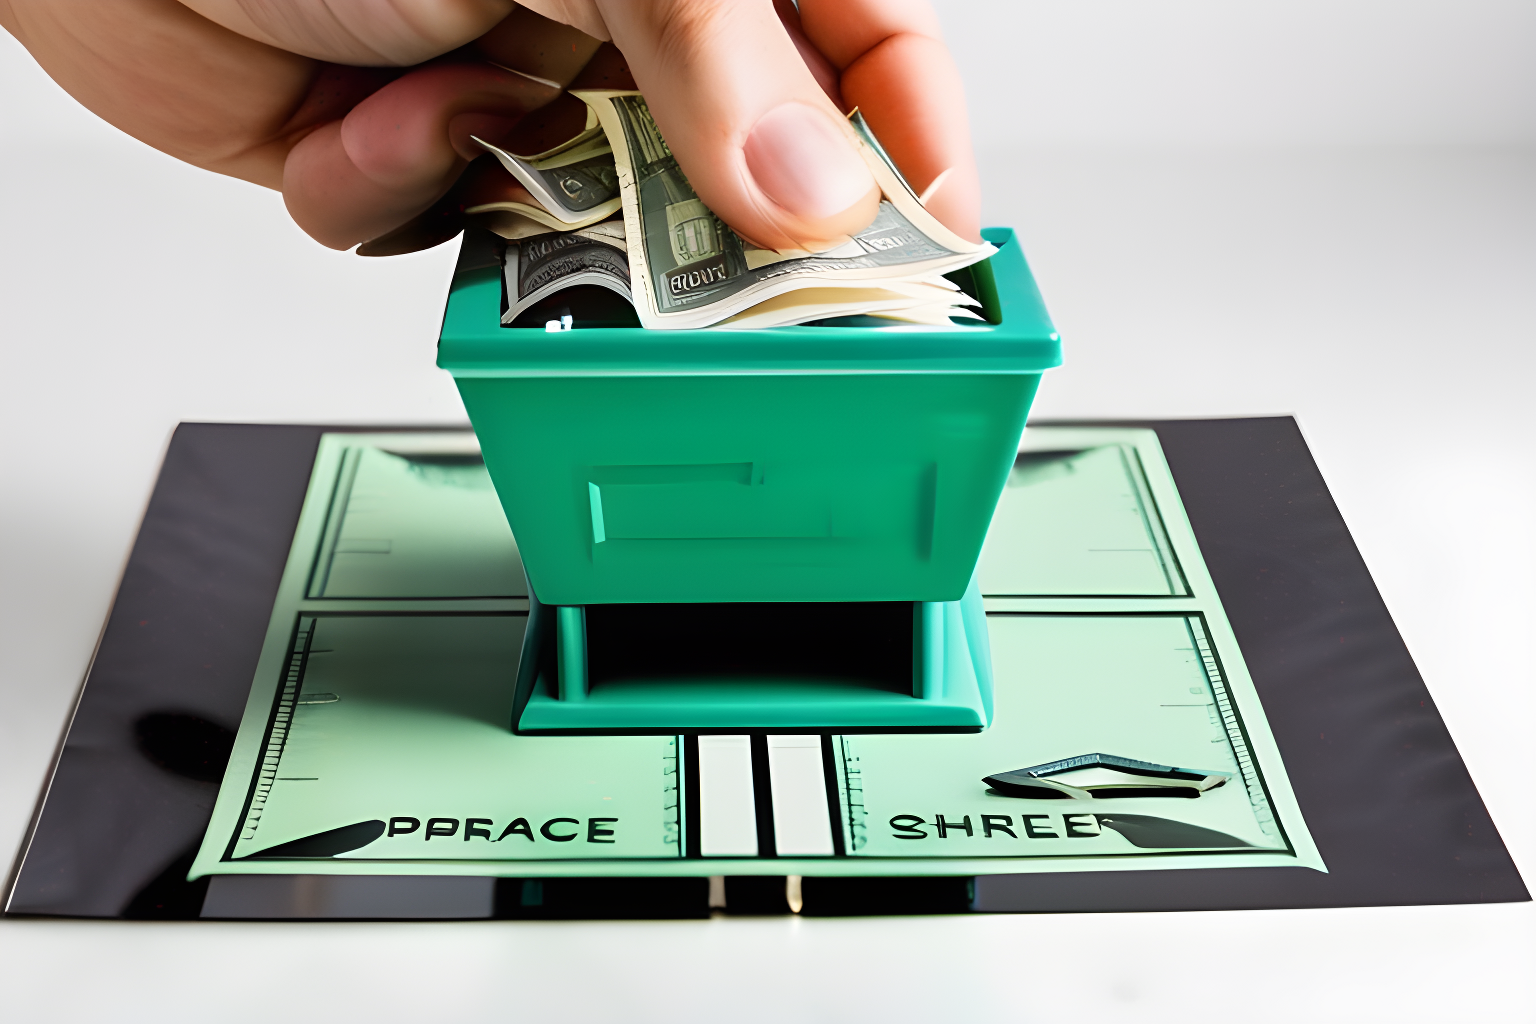 A monopoly board being passed through a paper shredder